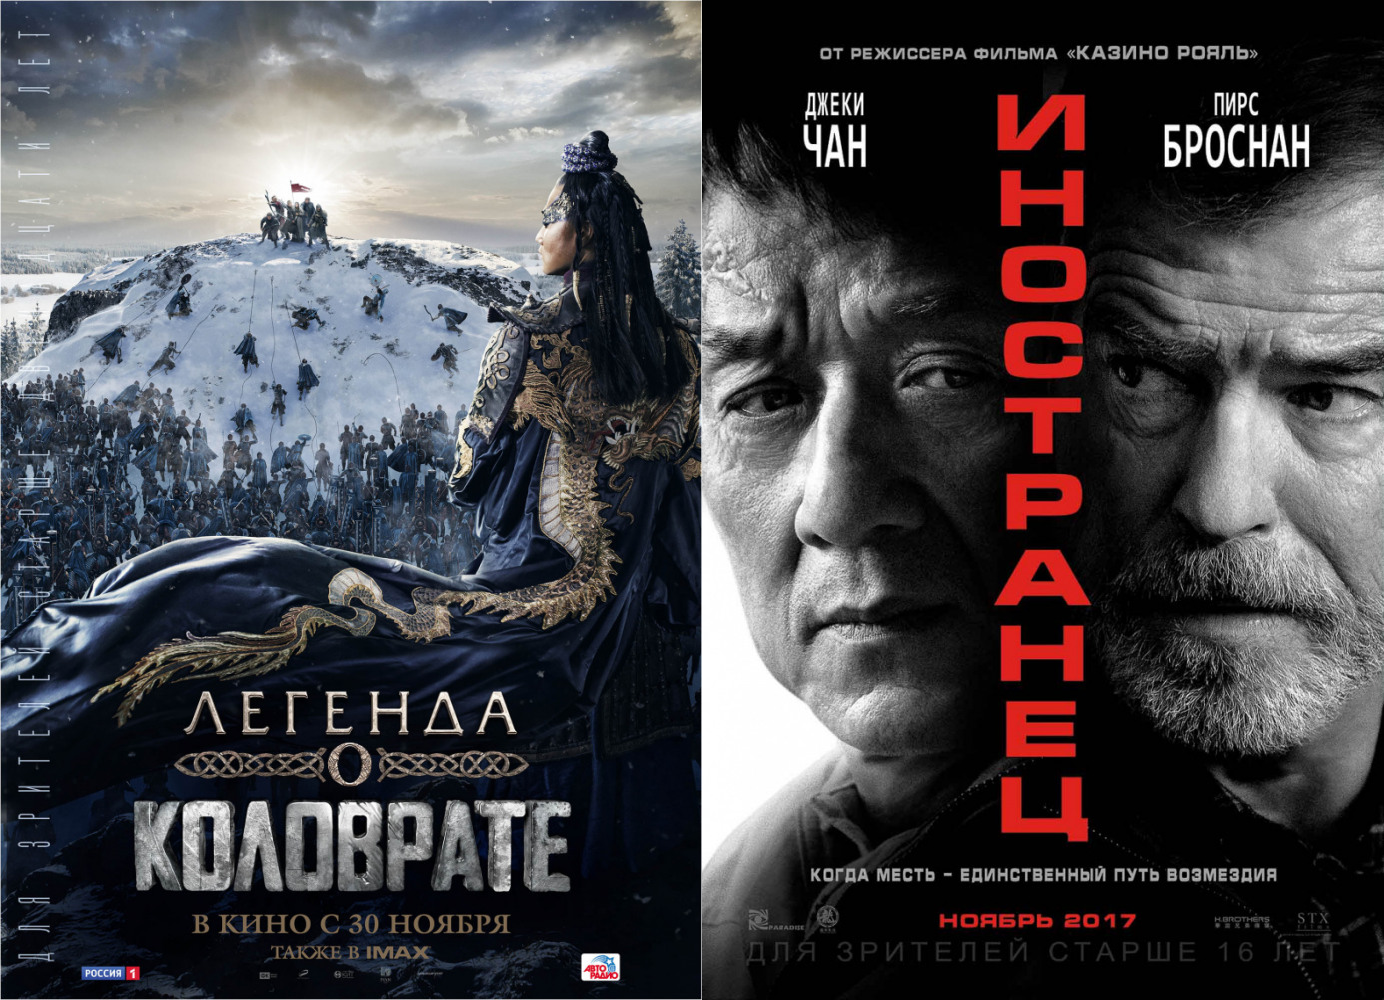 Russian box office receipts and distribution of screenings over the past weekend (November 30 - December 3) - Movies, Legend of Kolovrat, Иностранцы, Box office fees, Film distribution